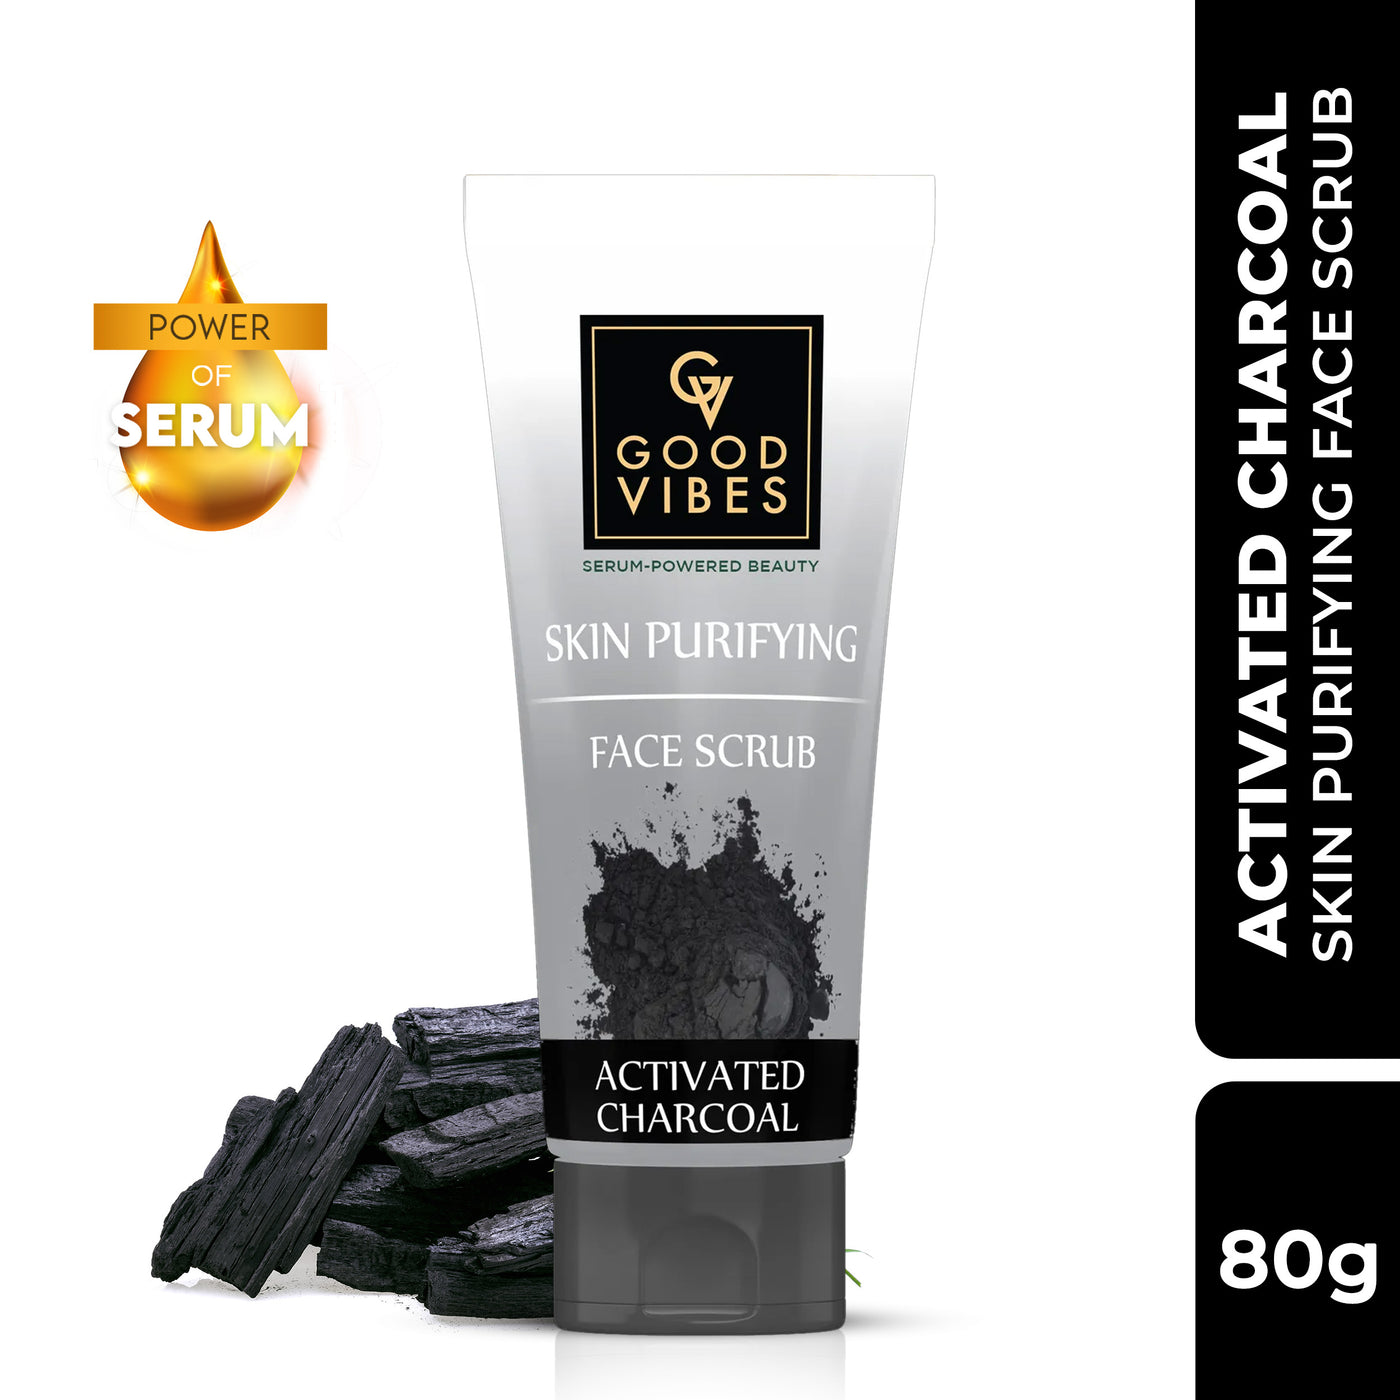 Skin Purifying Activated Charcoal Face Scrub (80g)